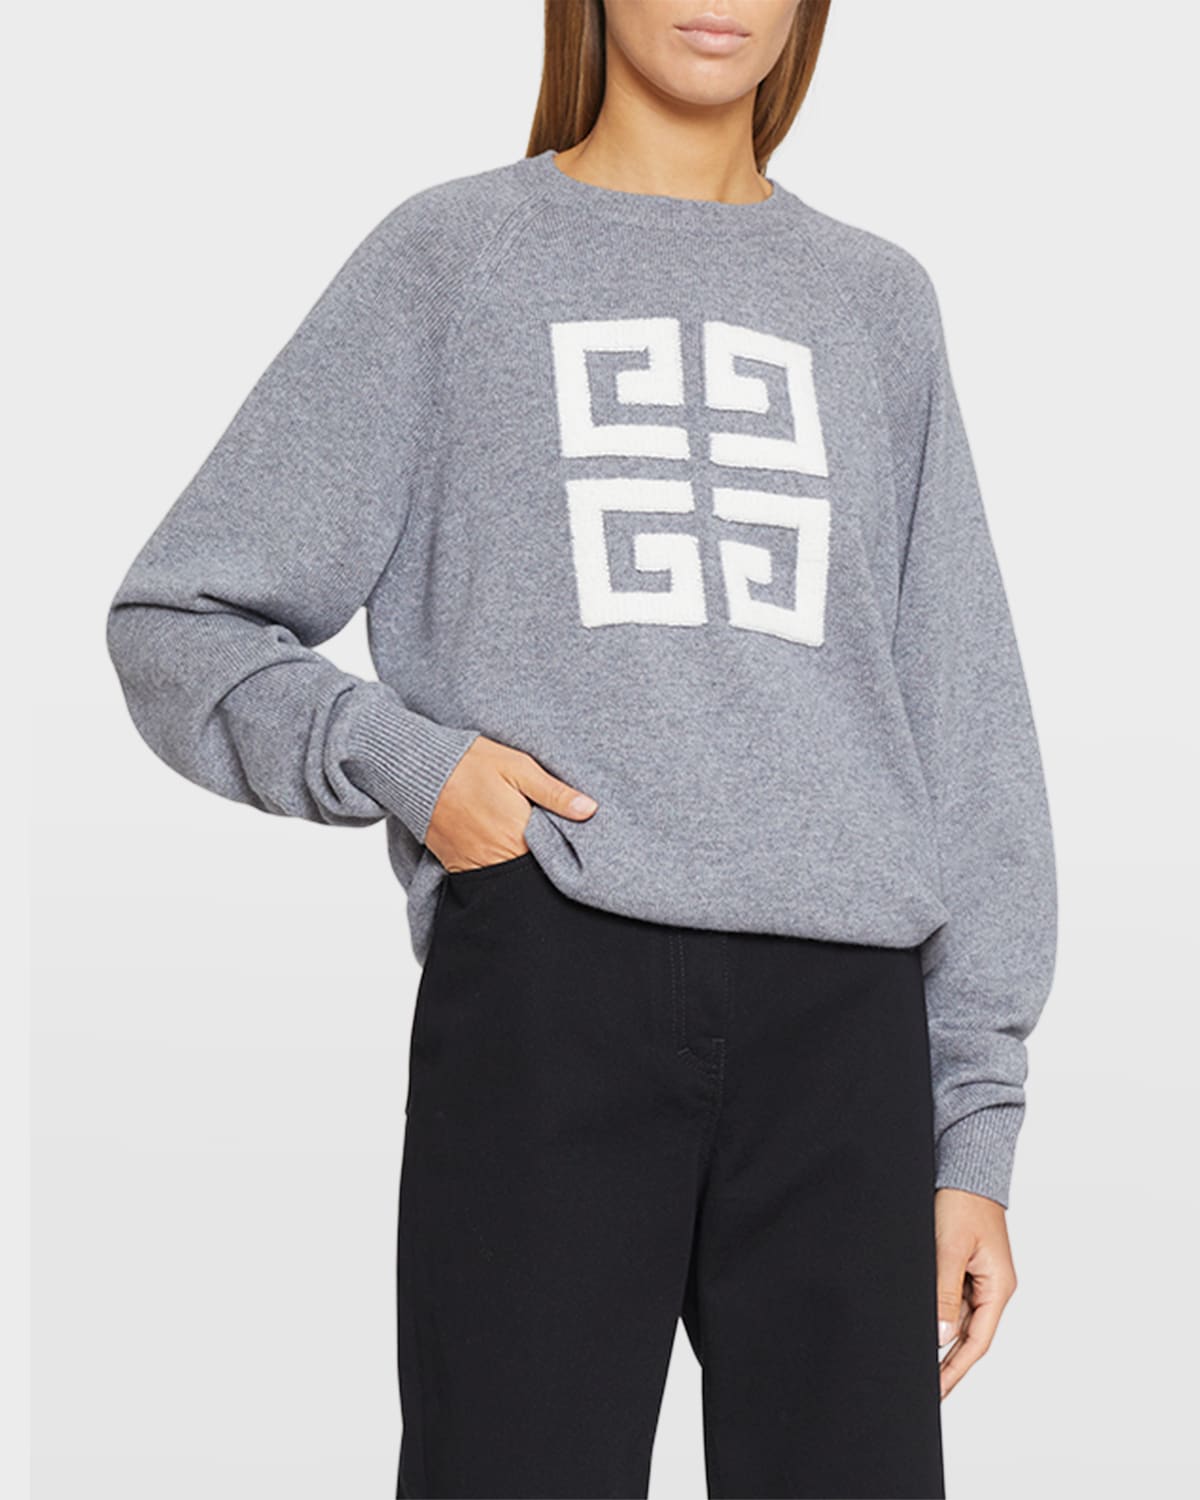 GIVENCHY 4G LOGO CASHMERE SWEATER